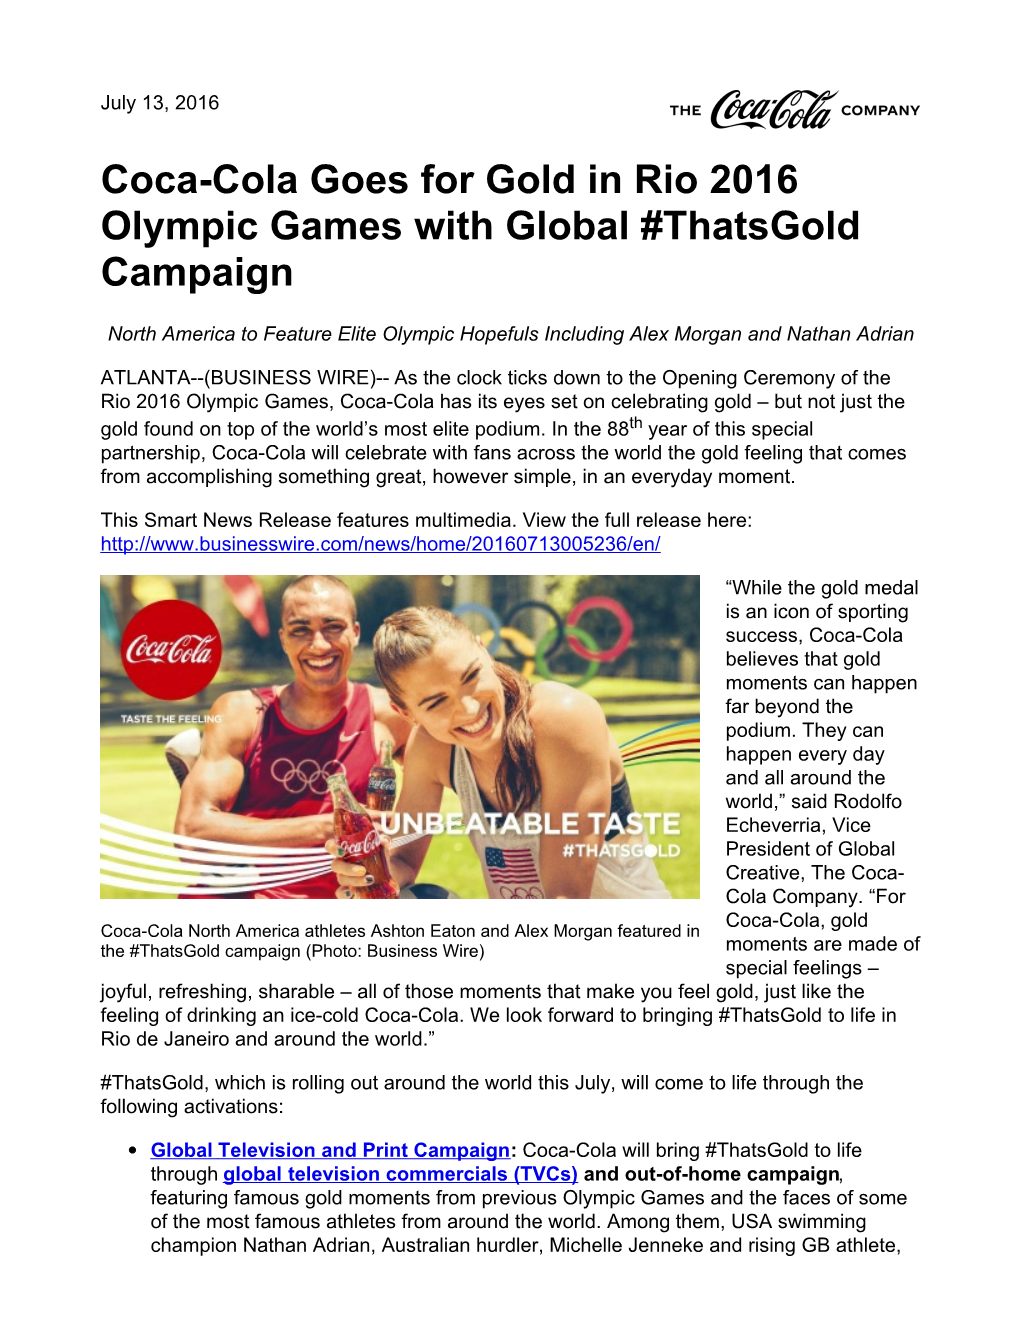 Coca-Cola Goes for Gold in Rio 2016 Olympic Games with Global #Thatsgold Campaign